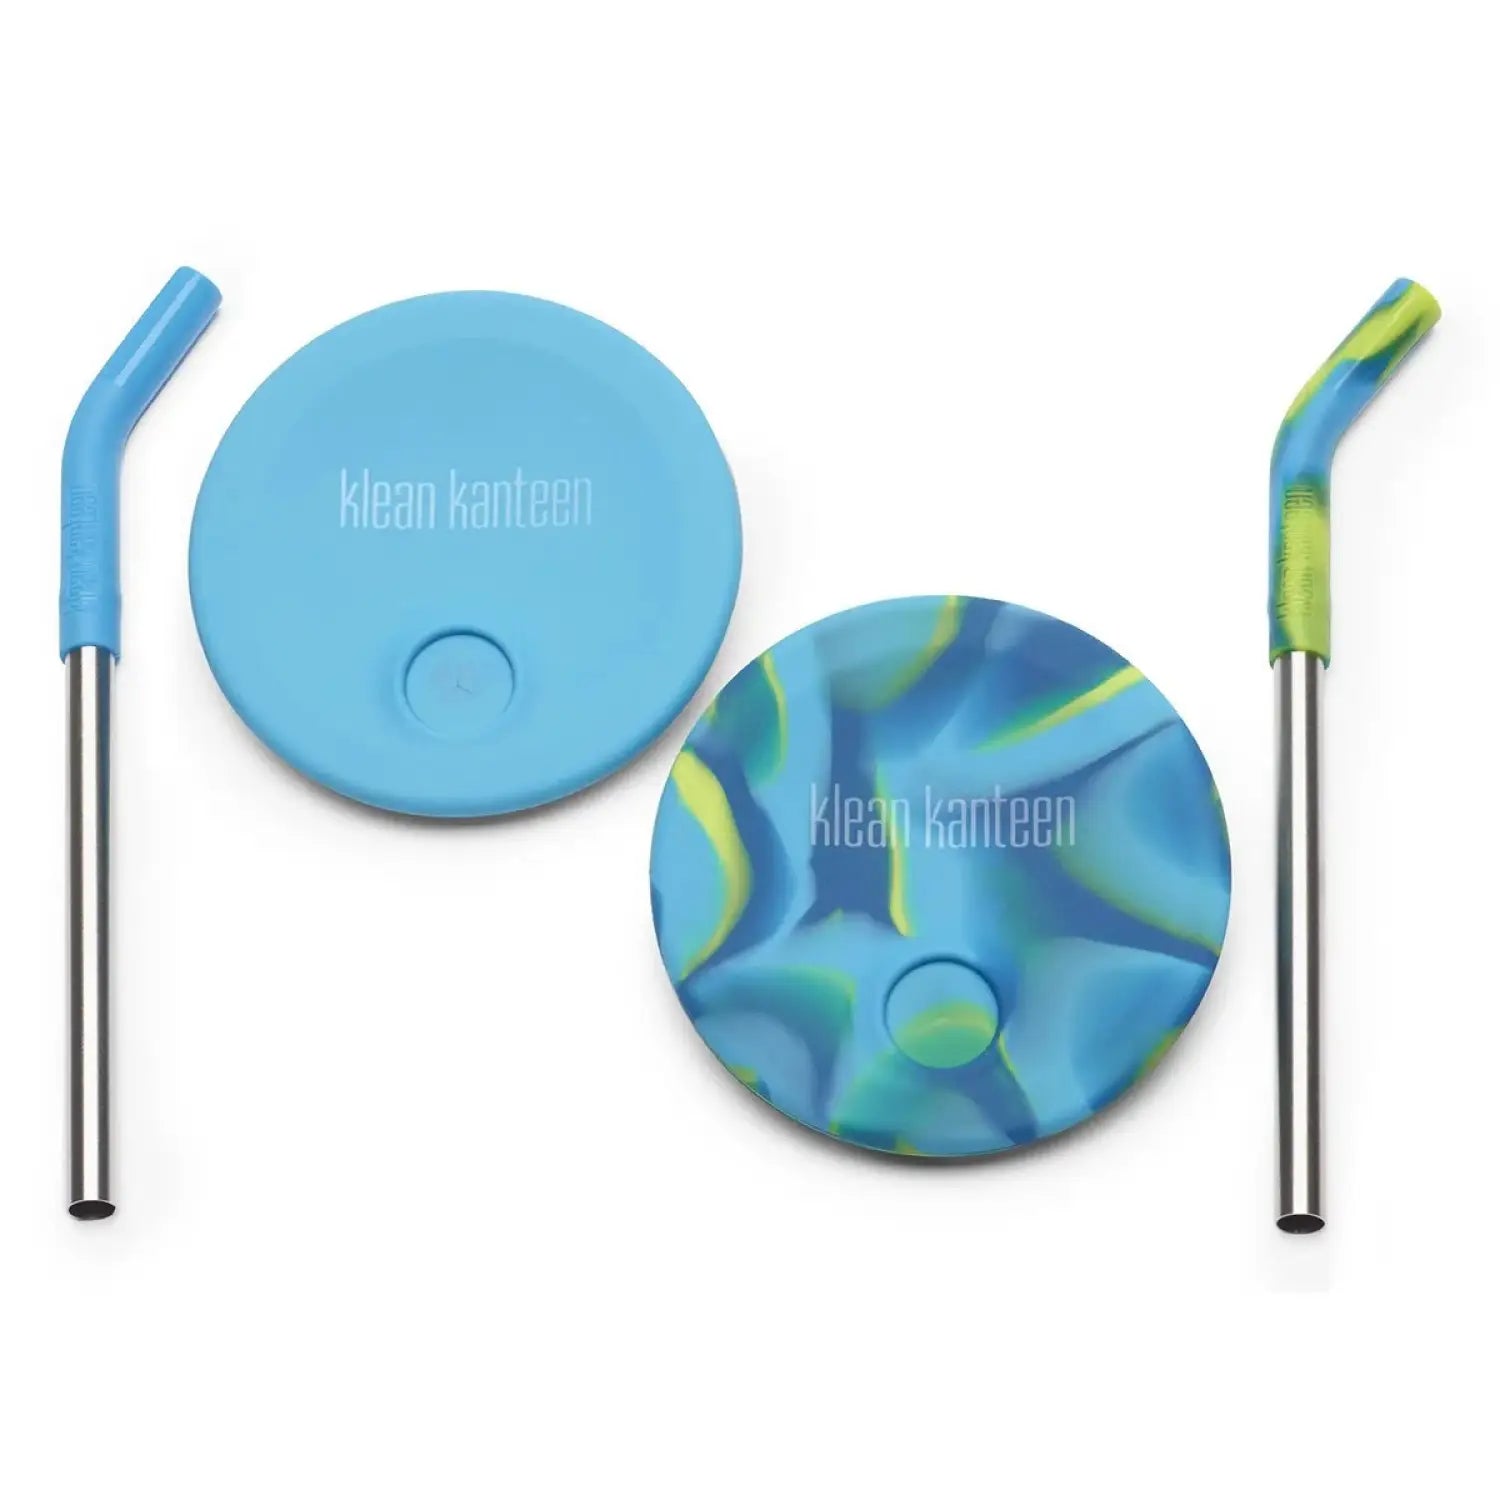 Klean Kanteen Kid's Cup Straw Lid 2-Pack shown in blue and blue tie-dye with reusable stainless steel straws.